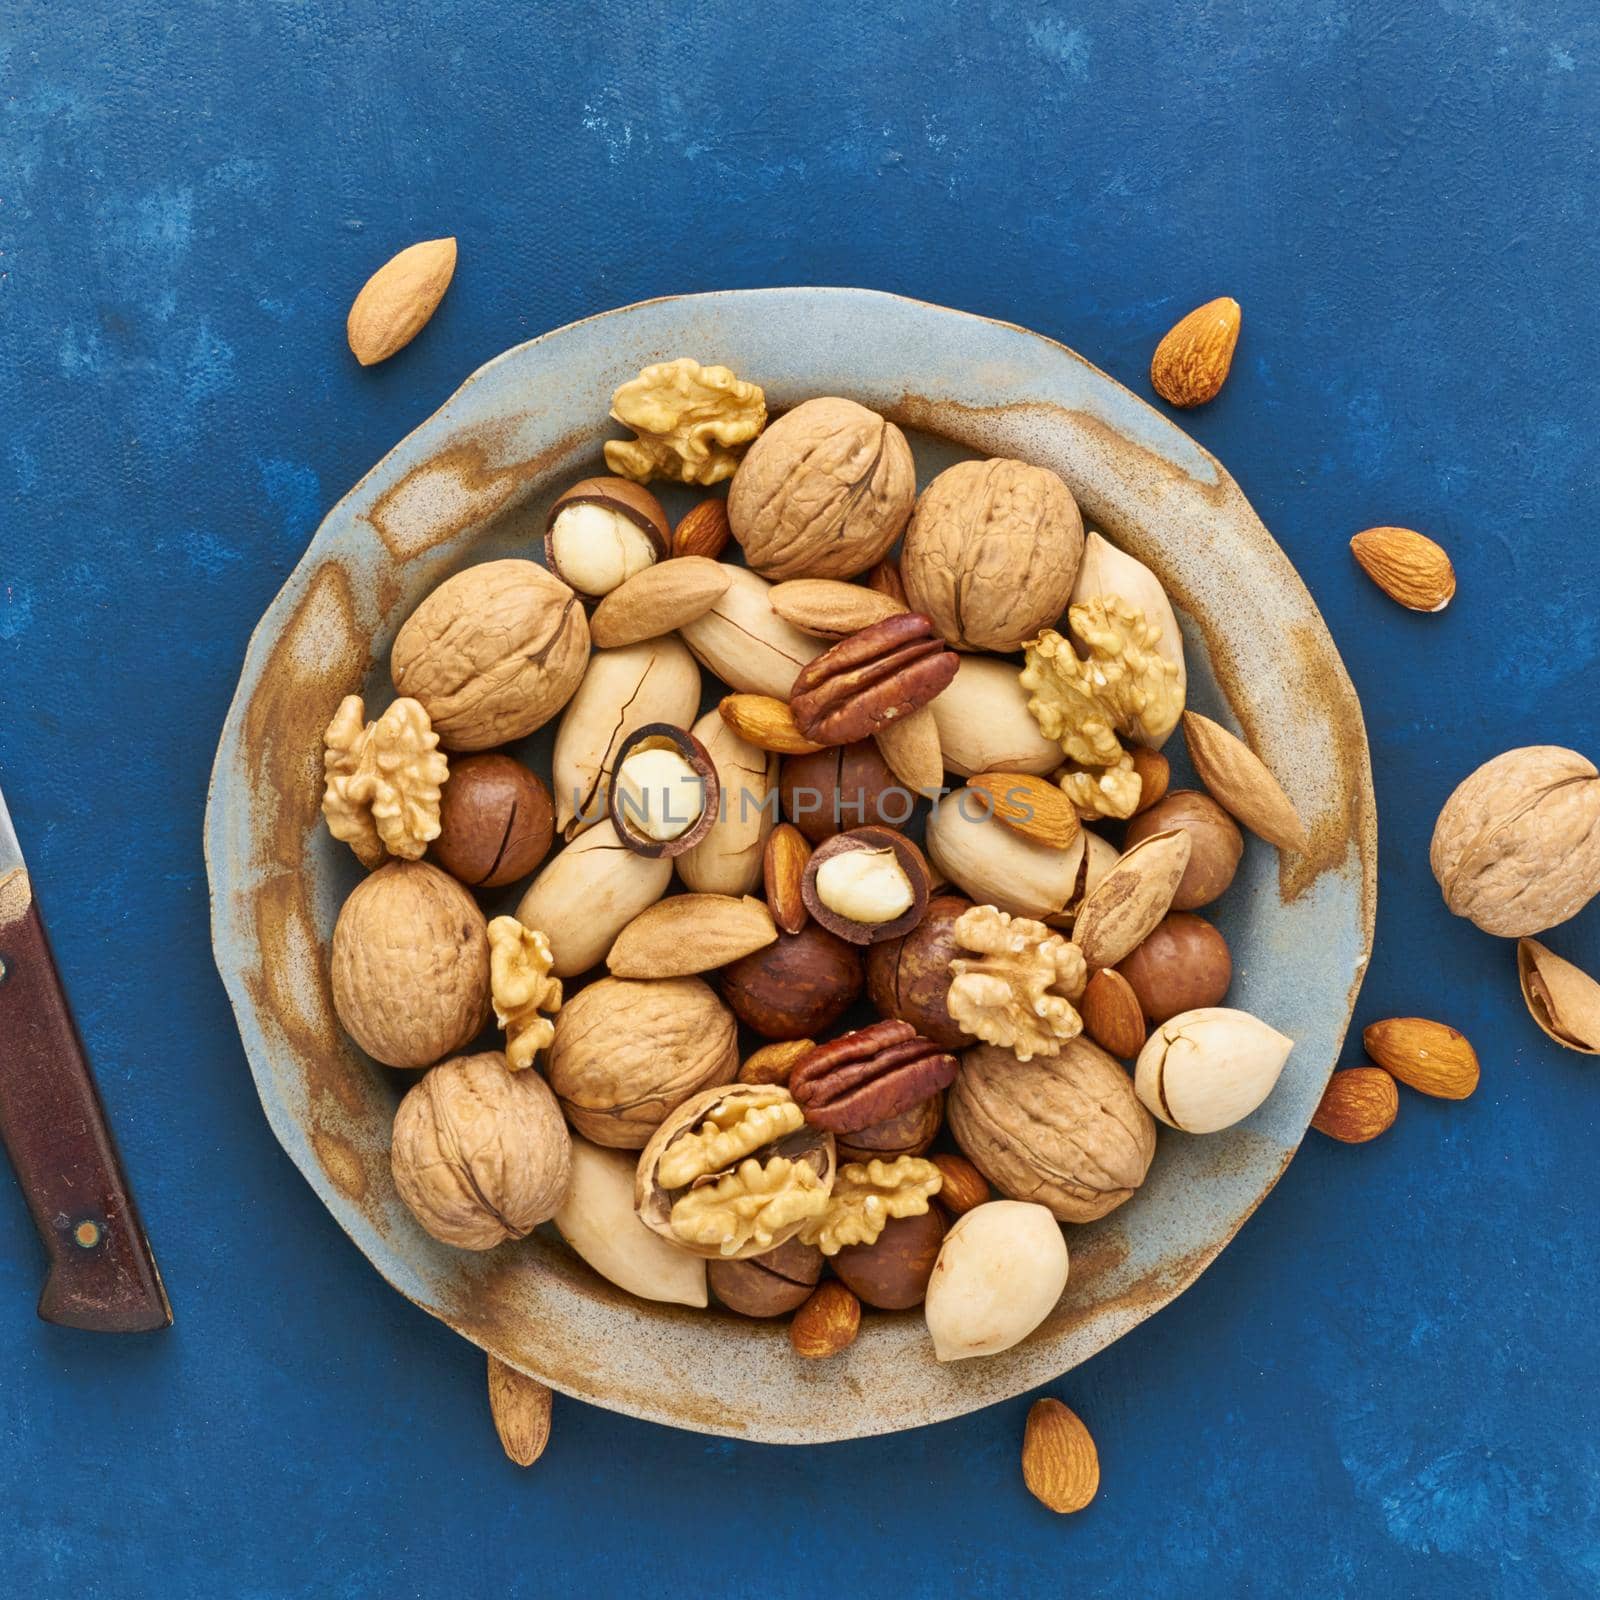 Classic blue in a food. Mix of nuts on plate - walnut, almonds, pecans, macadamia and knife for opening shell. Healthy vegan food. Clean eating, balanced diet. Top view, close up